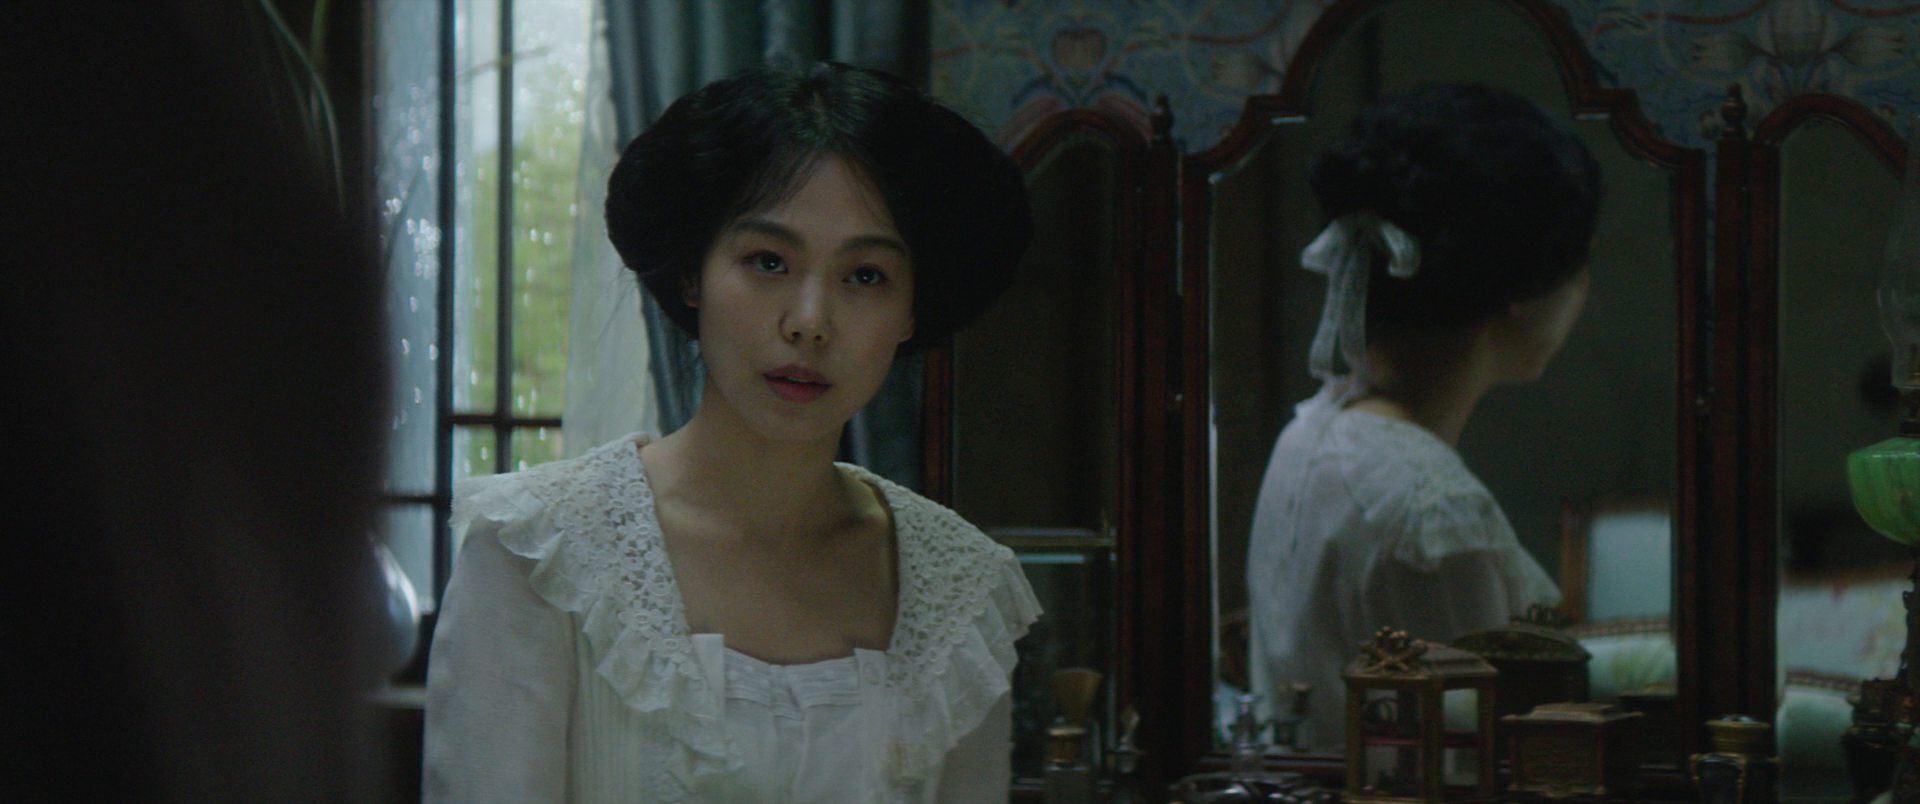 С The.Handmaiden.2016.KOREAN.EXTENDED.1080p.BluRay.x264.DD5.1-FGT 17.56GB-3.png